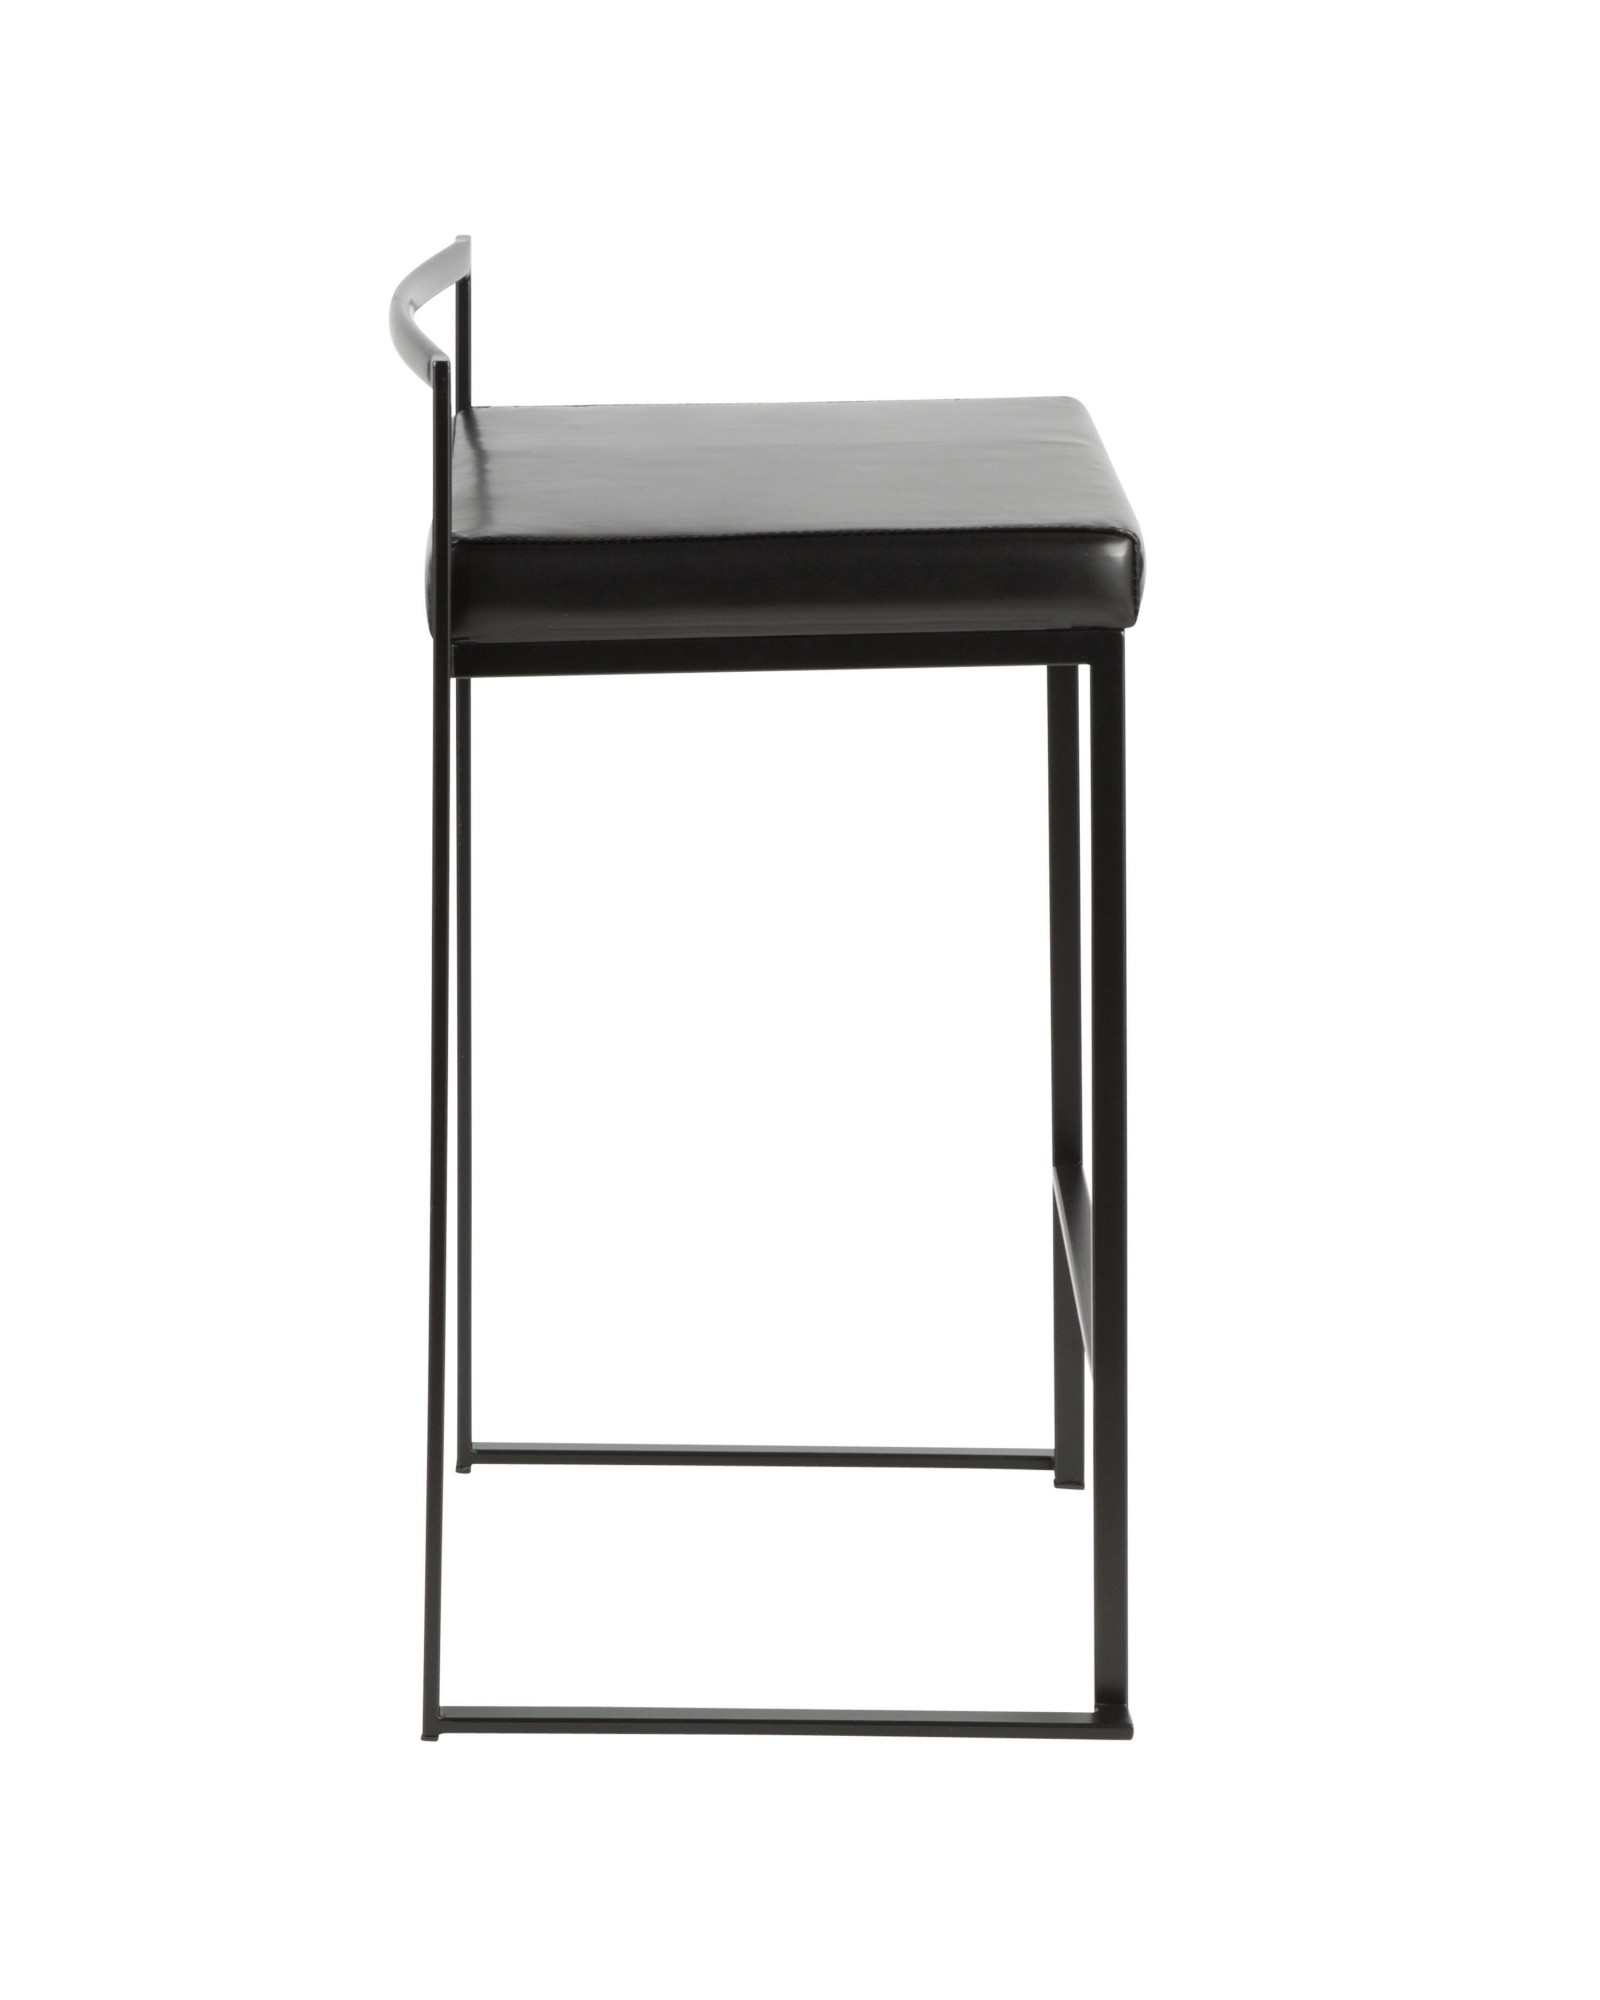 Fuji Contemporary Stackable Counter Stool in Black with Black Faux Leather Cushion - Set of 2